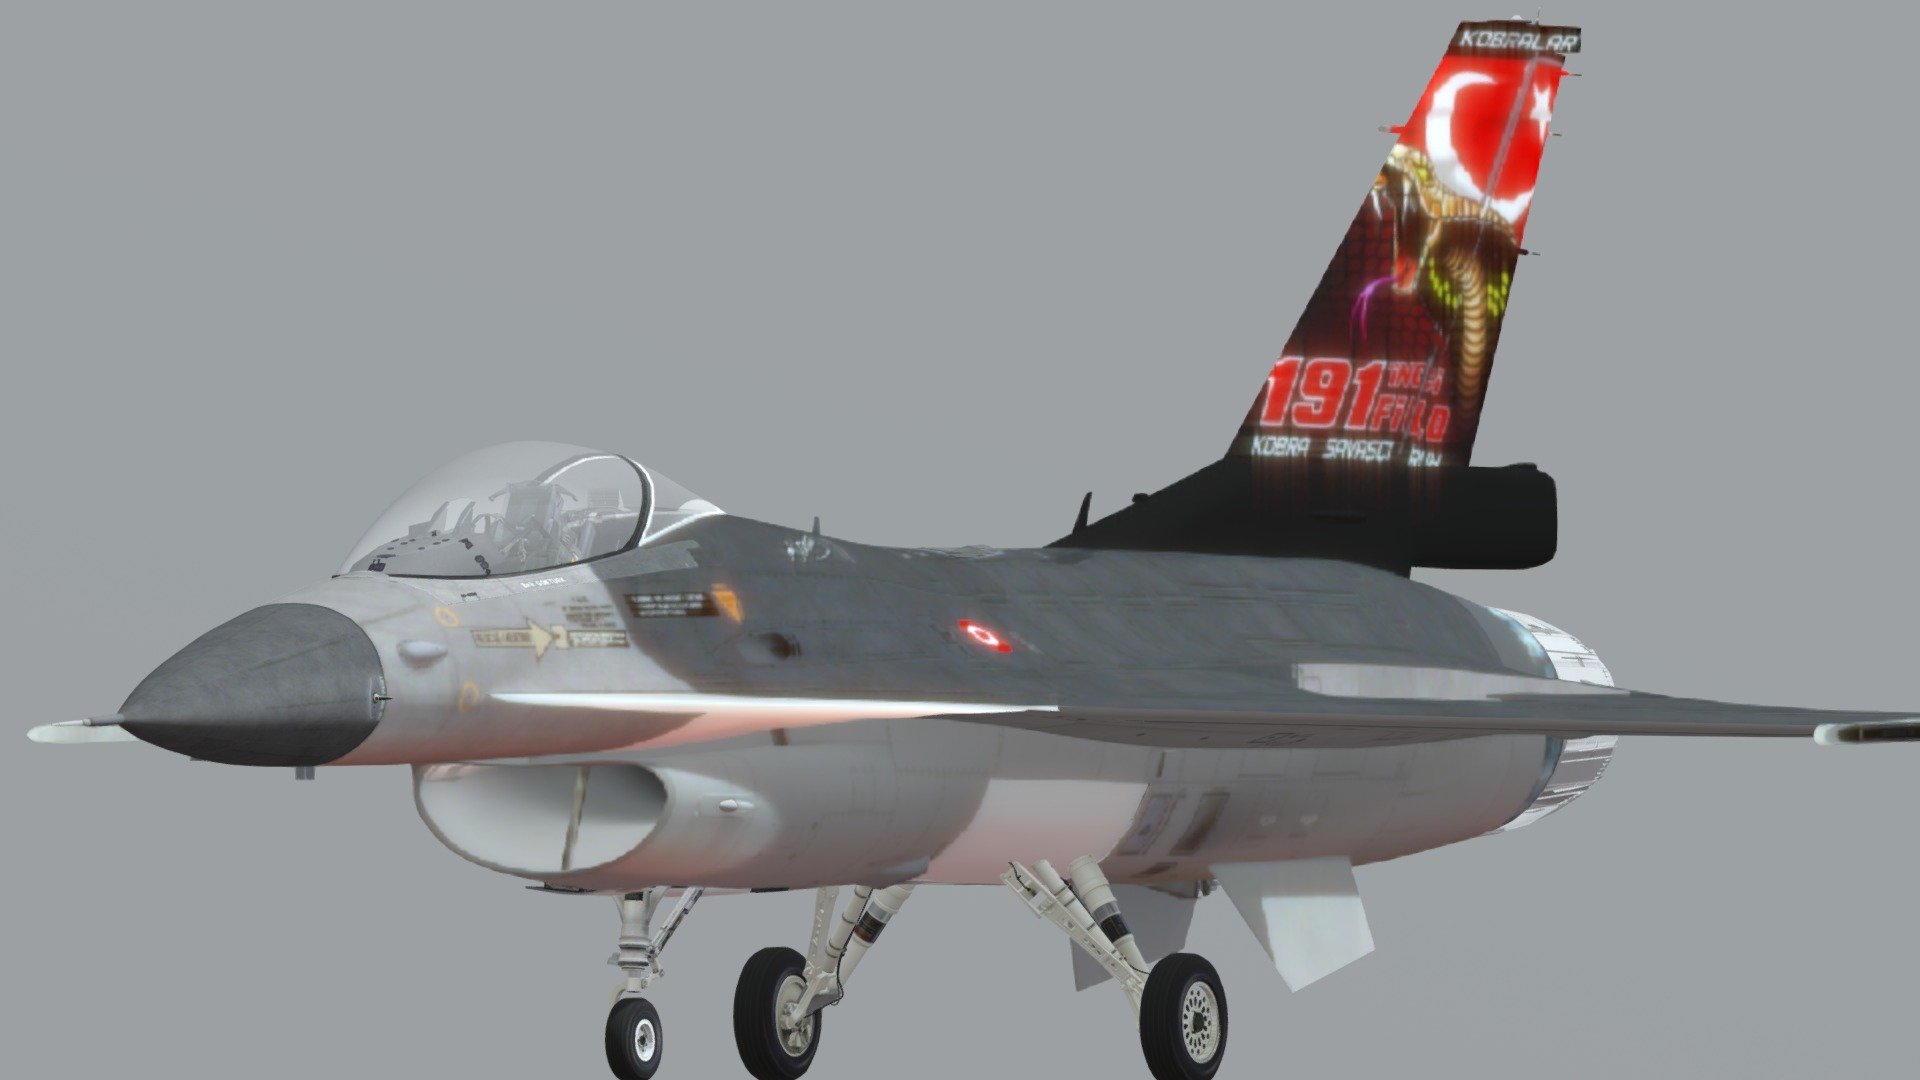 F-16C/D Block 50 Fighting Falcon Turkish Air Force 191. Fleet

Model made by codeata, texture fixes cyber - F-16 - Download Free 3D model by Cxyber (@lCxyber) 3d model